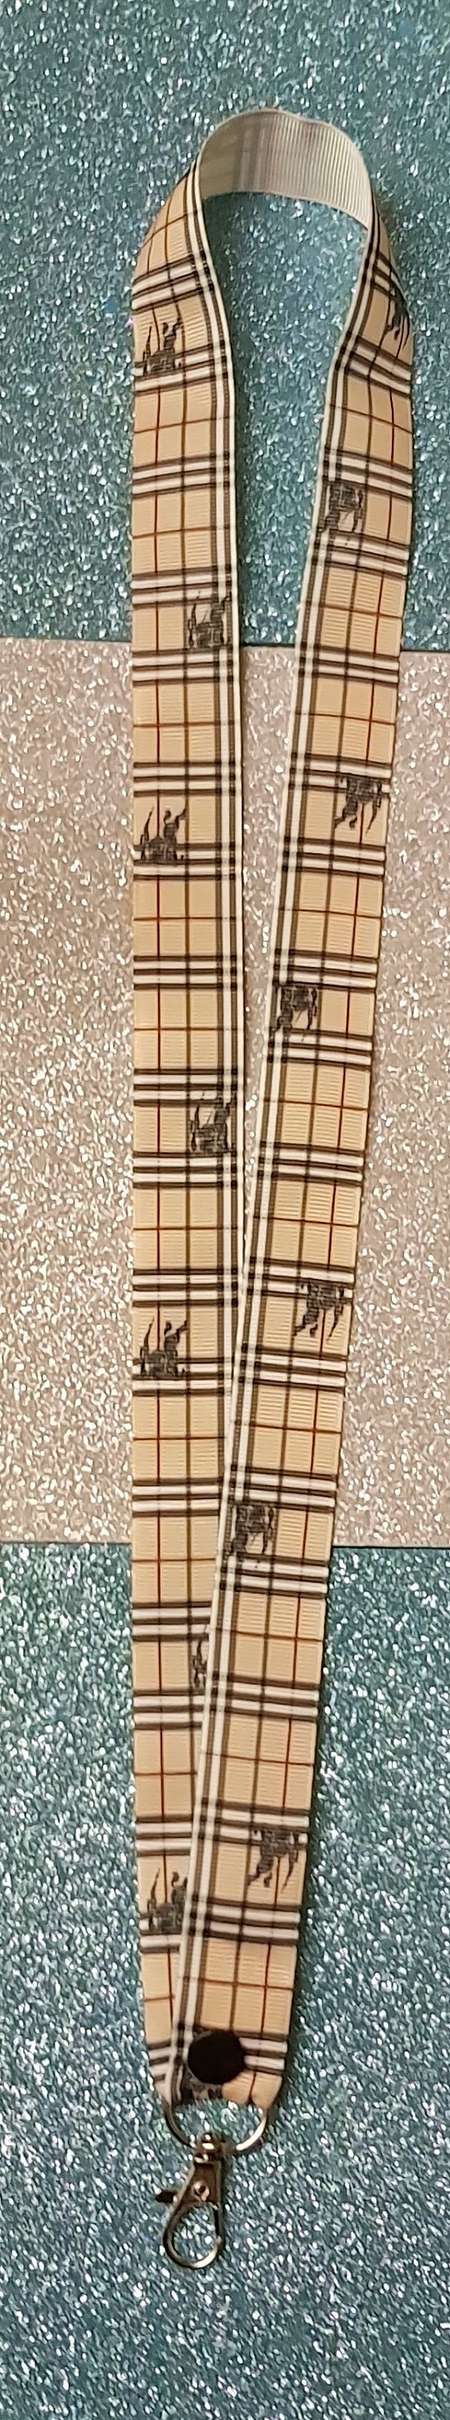 Adults Childs Burberry Lanyard Id Badge Holder Or Wriststrap Keyfob